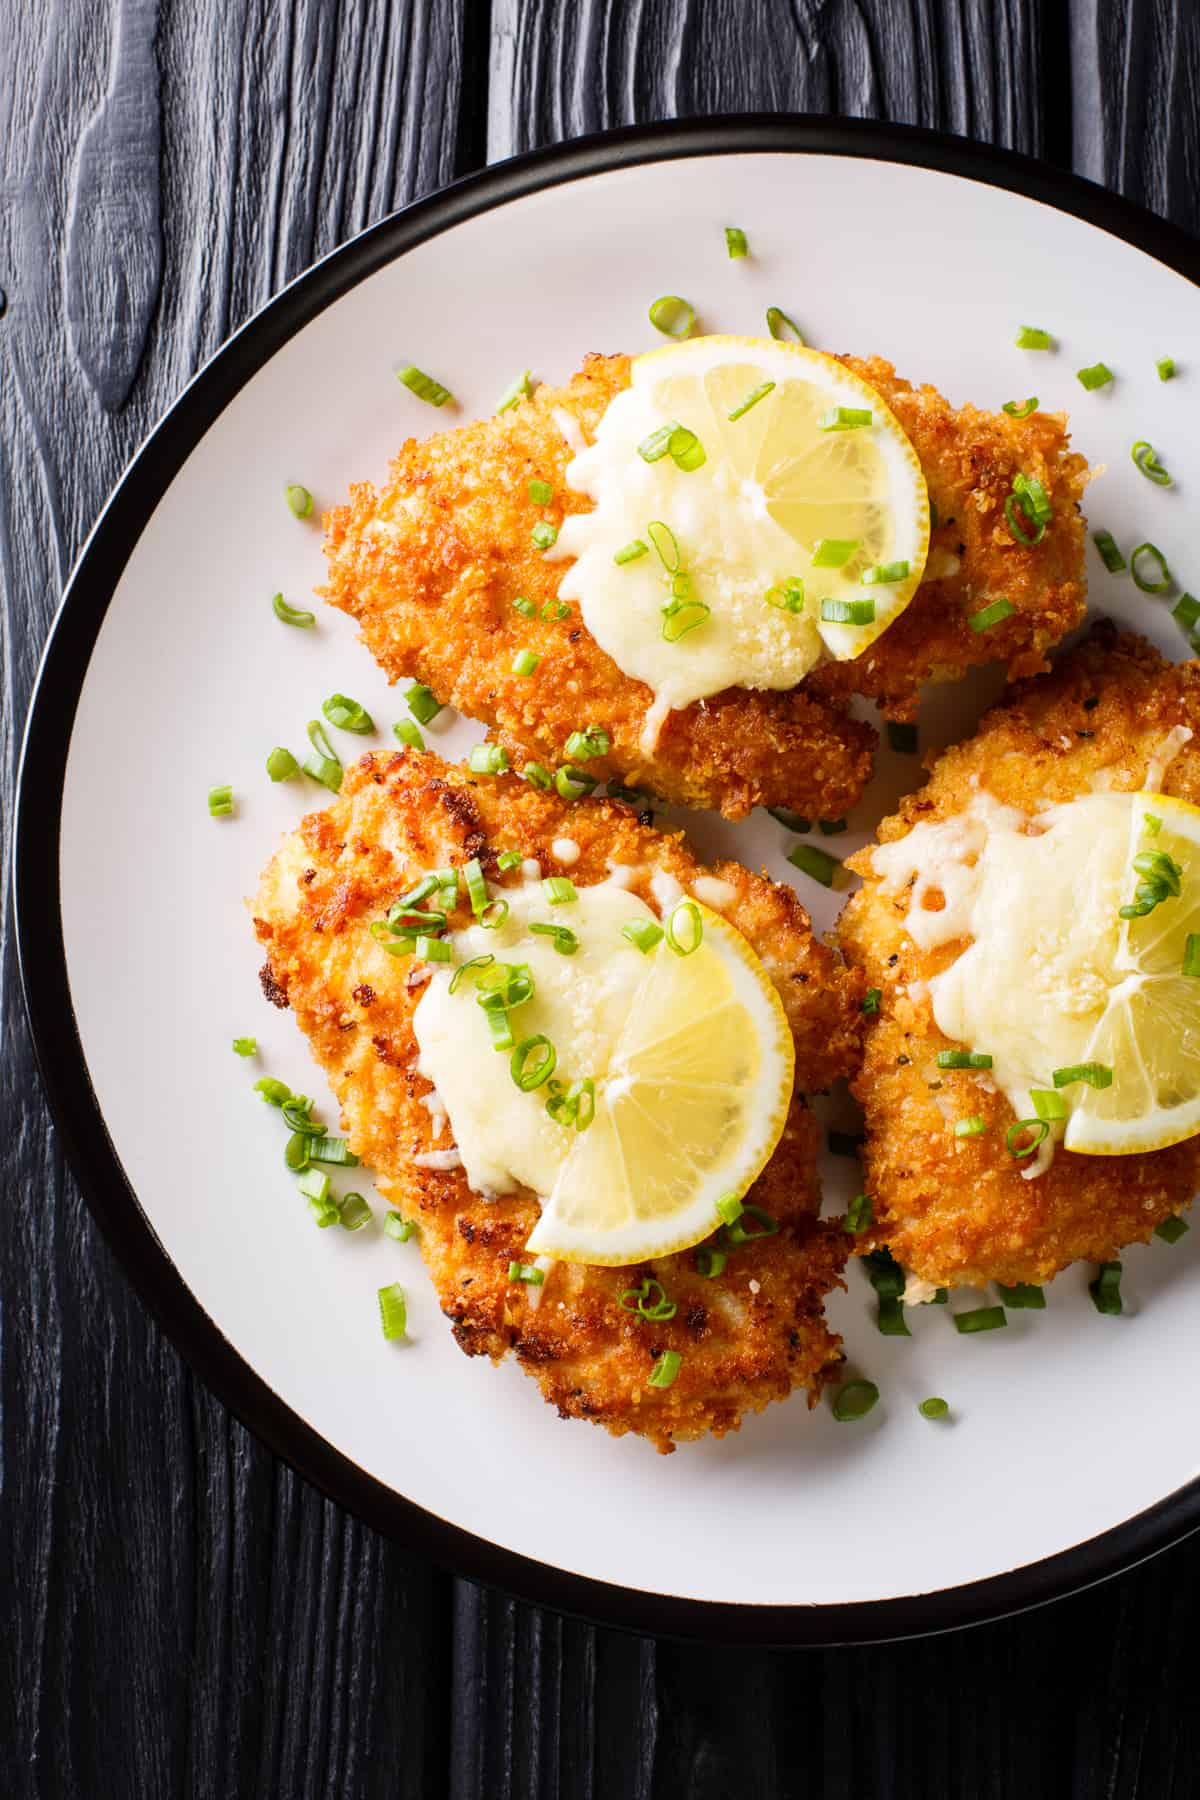 Overhead shot of three breaded chicken breasts, also known as chicken milanese, arranged on a plate and topped with lemon slices.